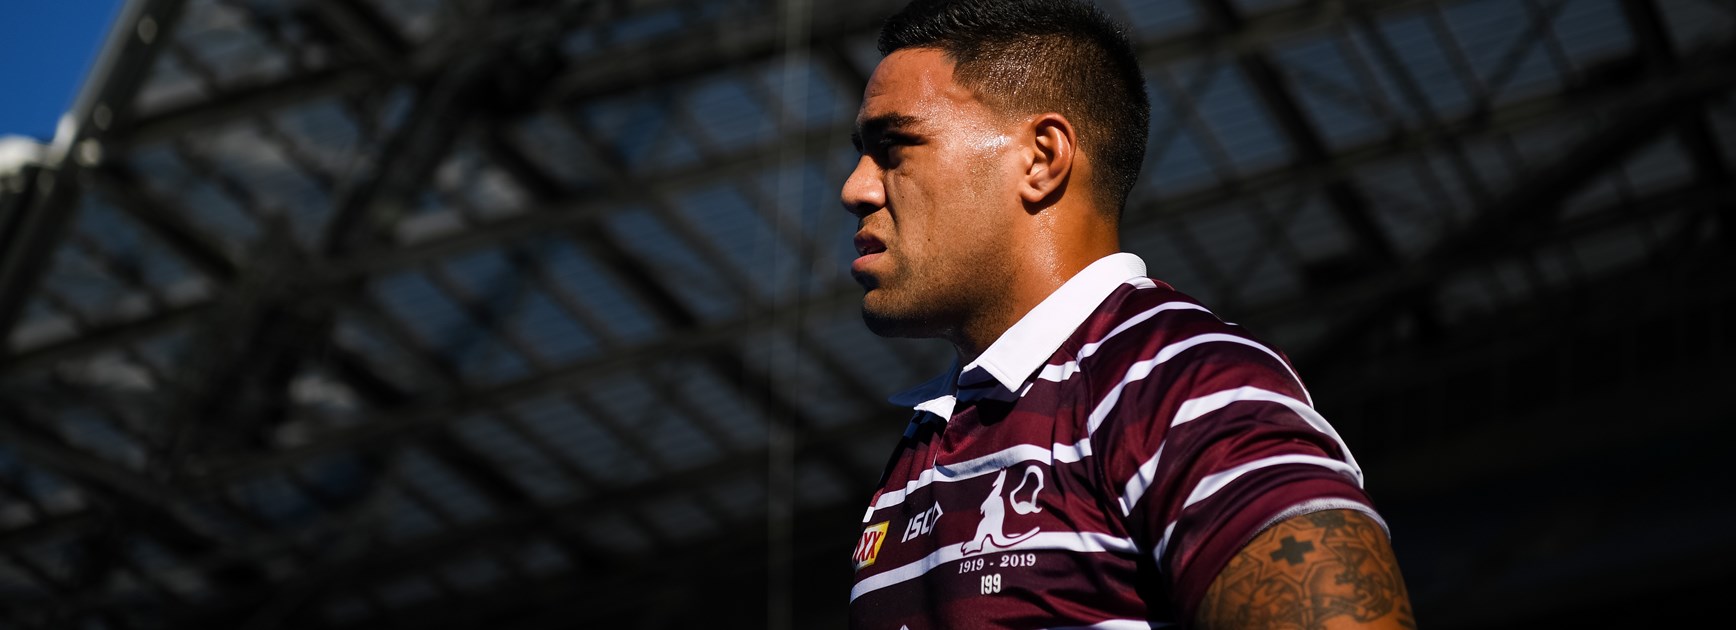 Maroons props Ofahengaue and Welch will run for Myles